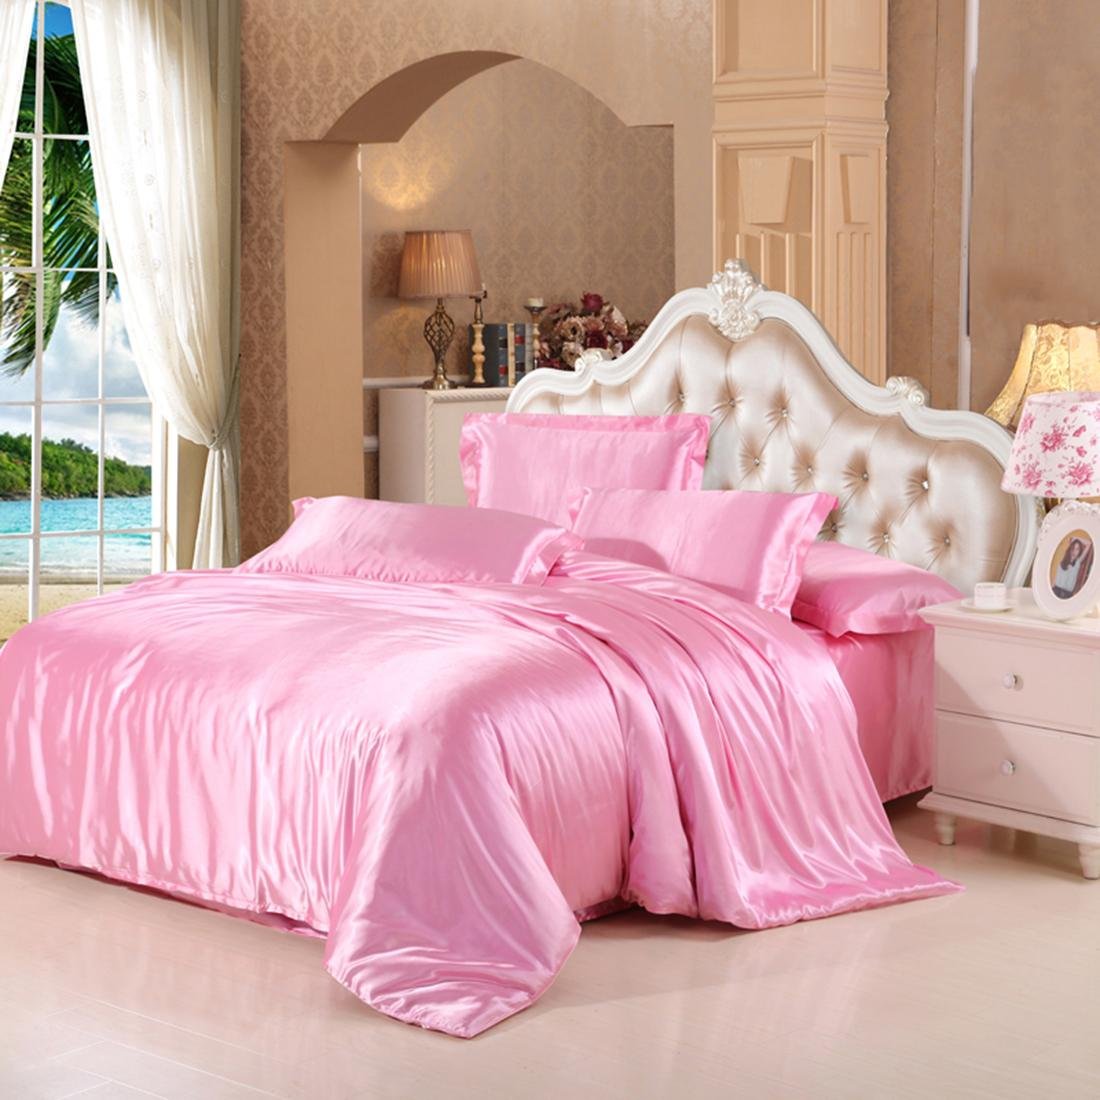 30 Inch Pocket Sheet Set Mulberry Sateen Silk Baby Blush Pink at-www.egyptianhomelinens.com